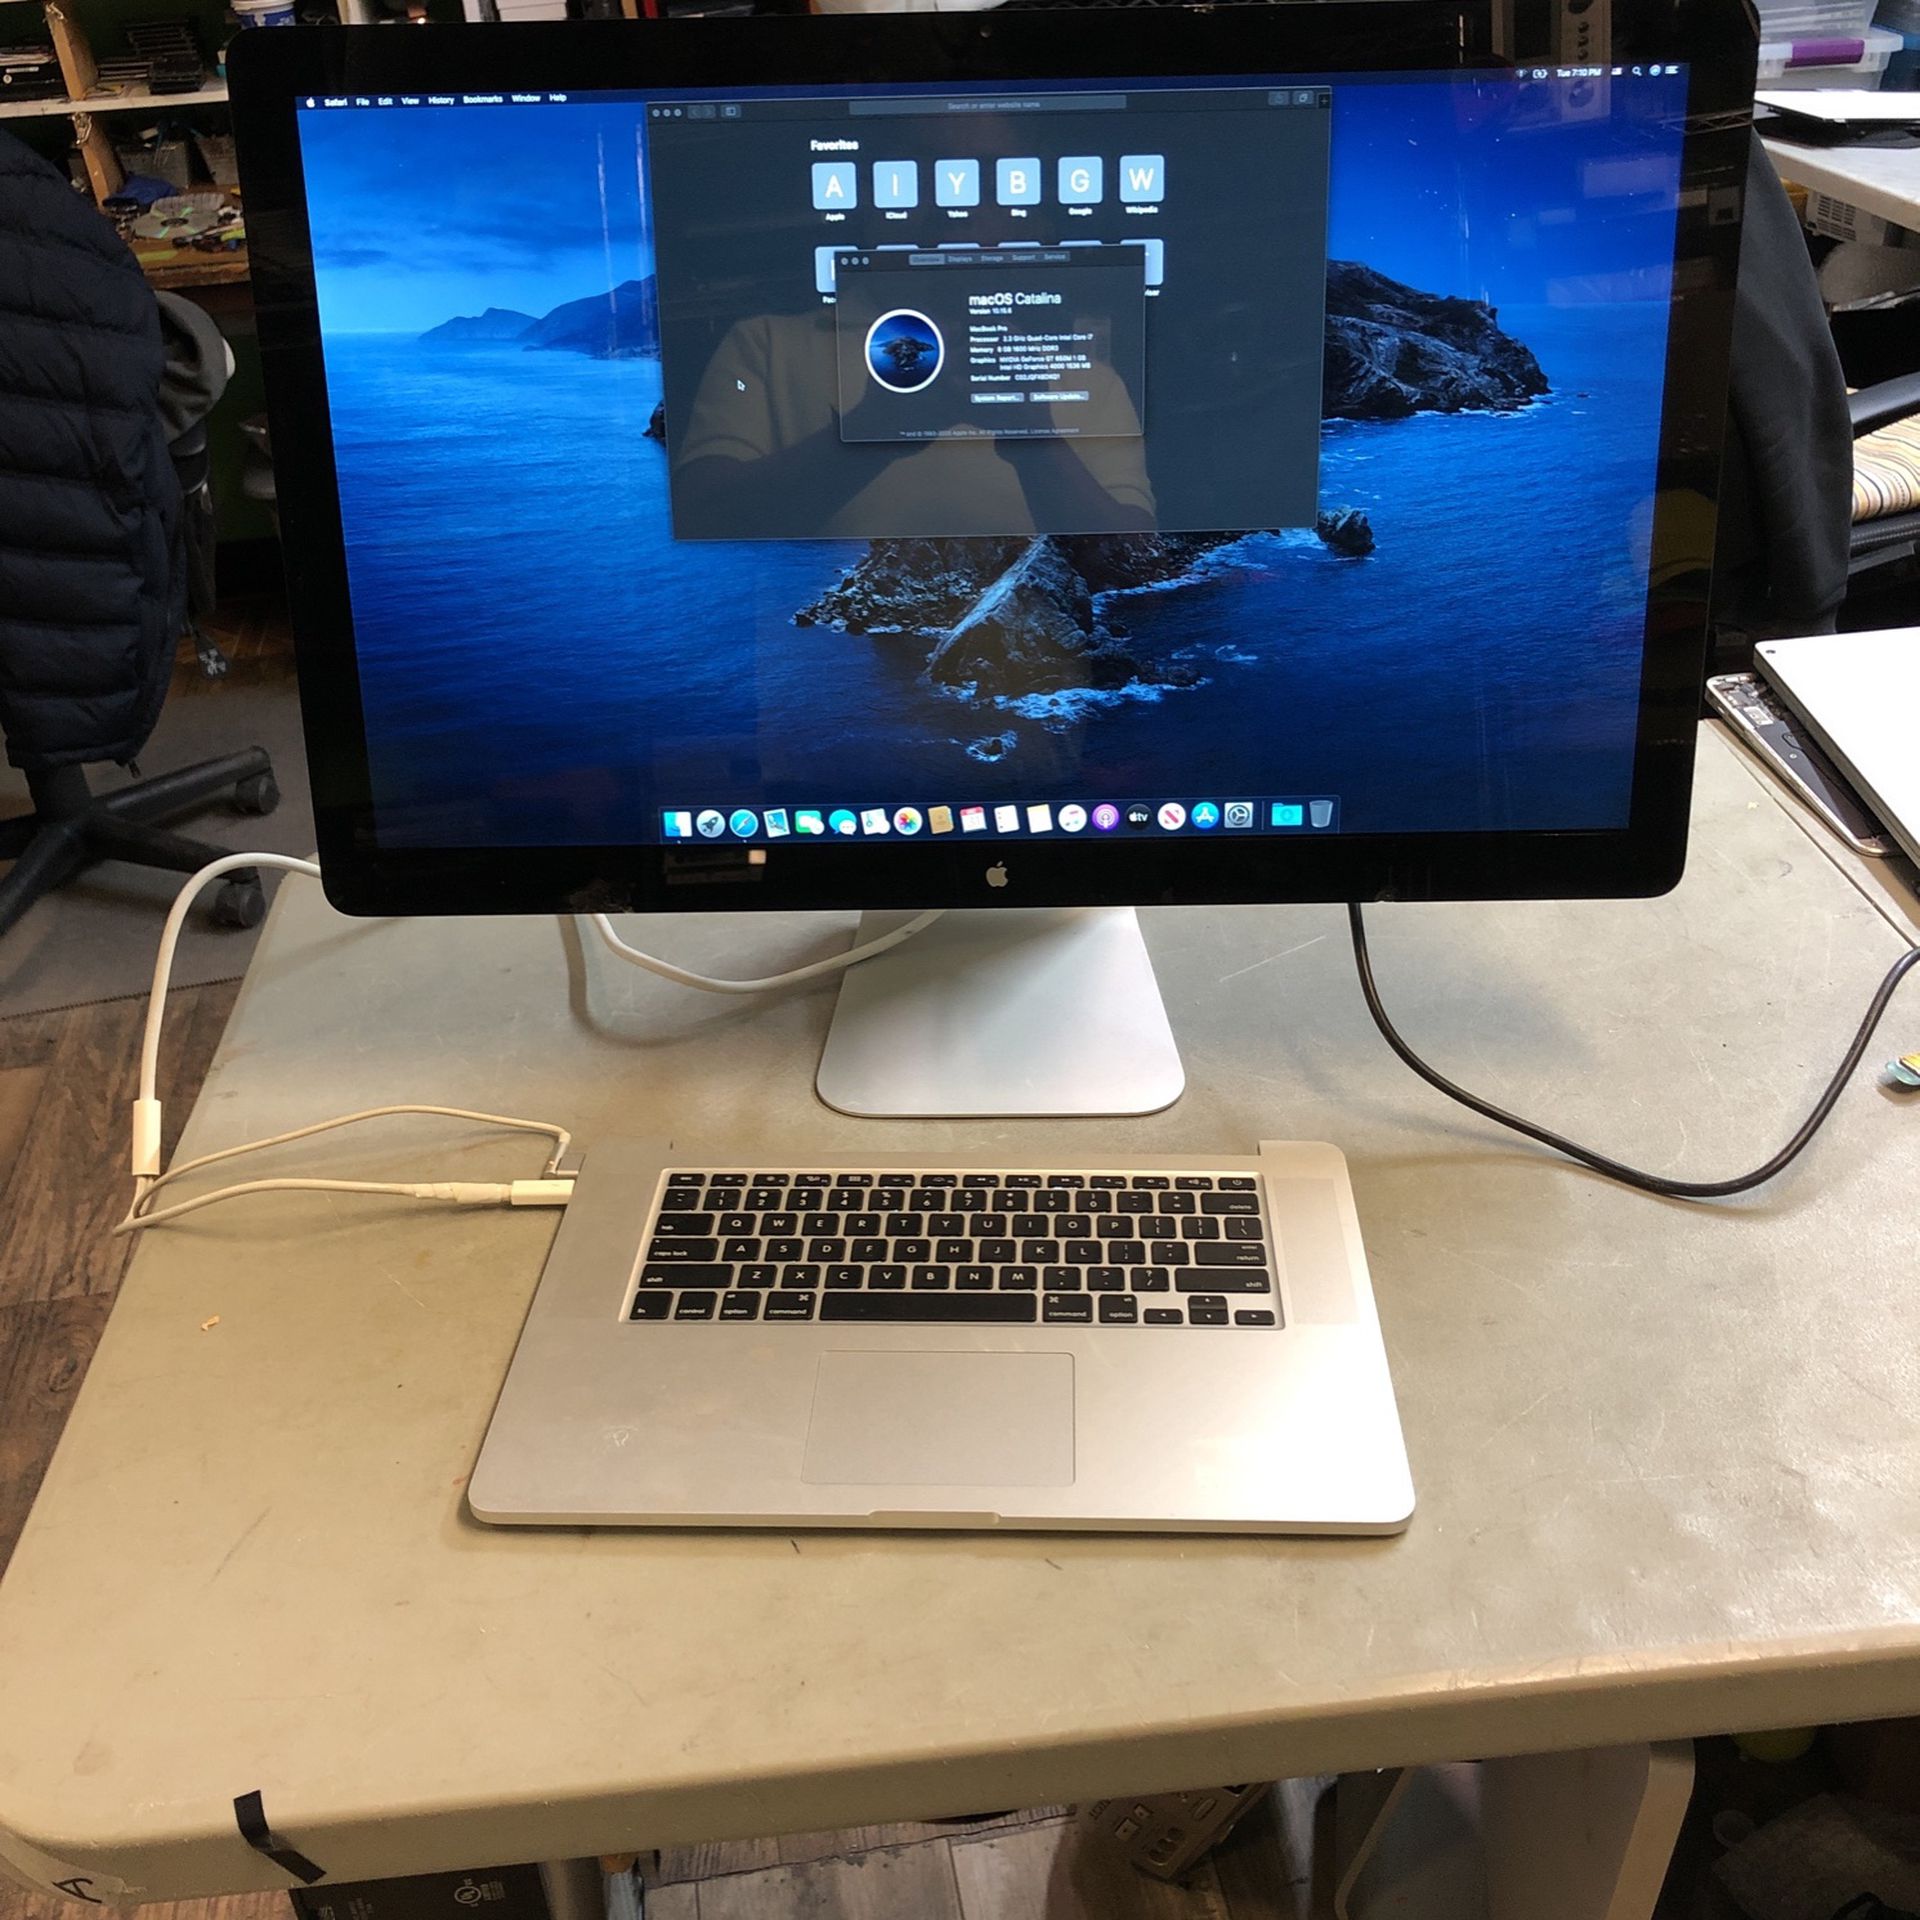 Macbook Pro 15 Inches With 27” Thunderbolt Display